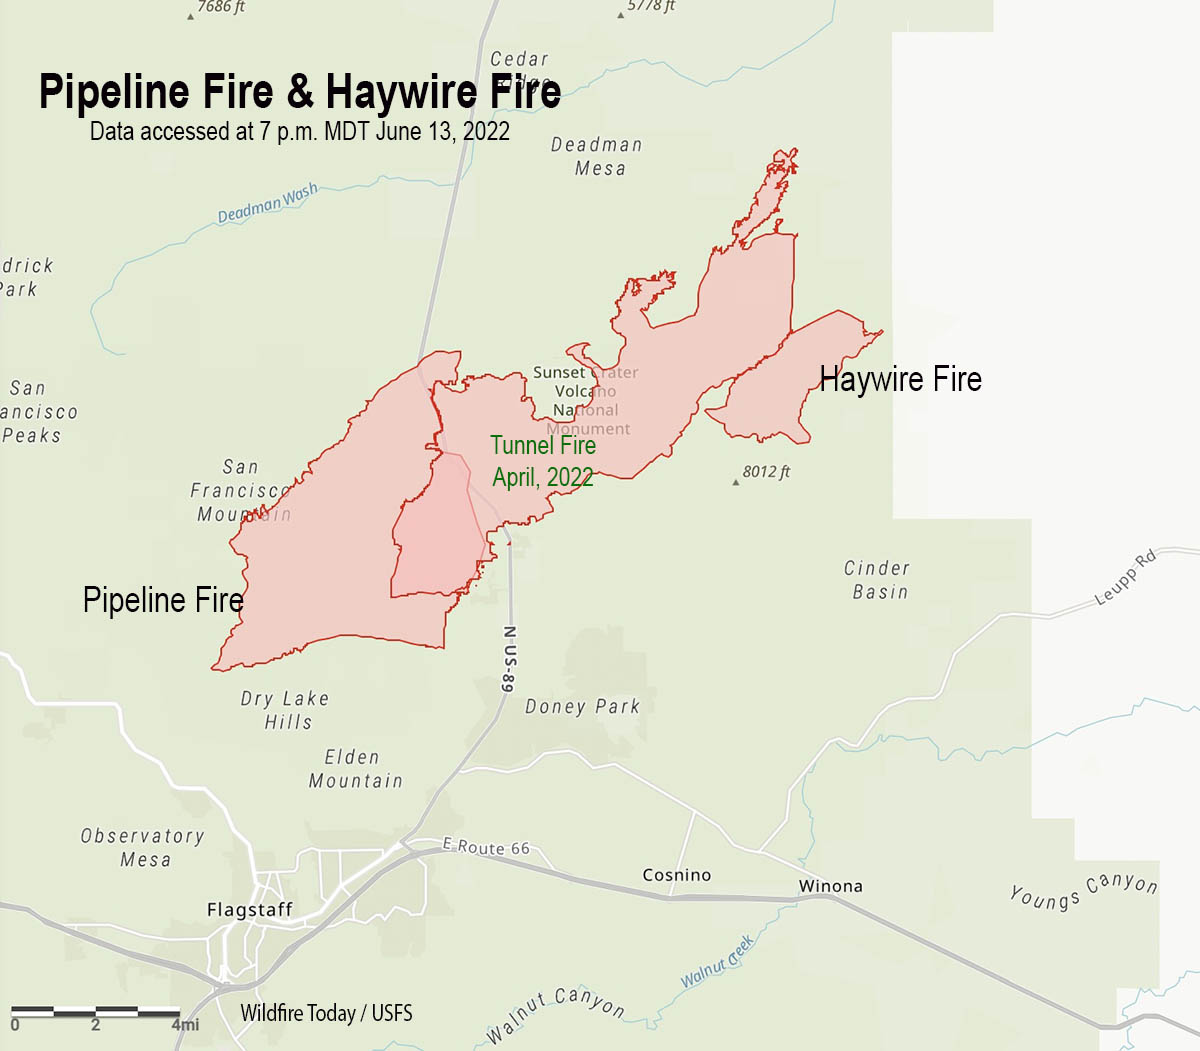 Map of the Pipeline & Haywire Fires